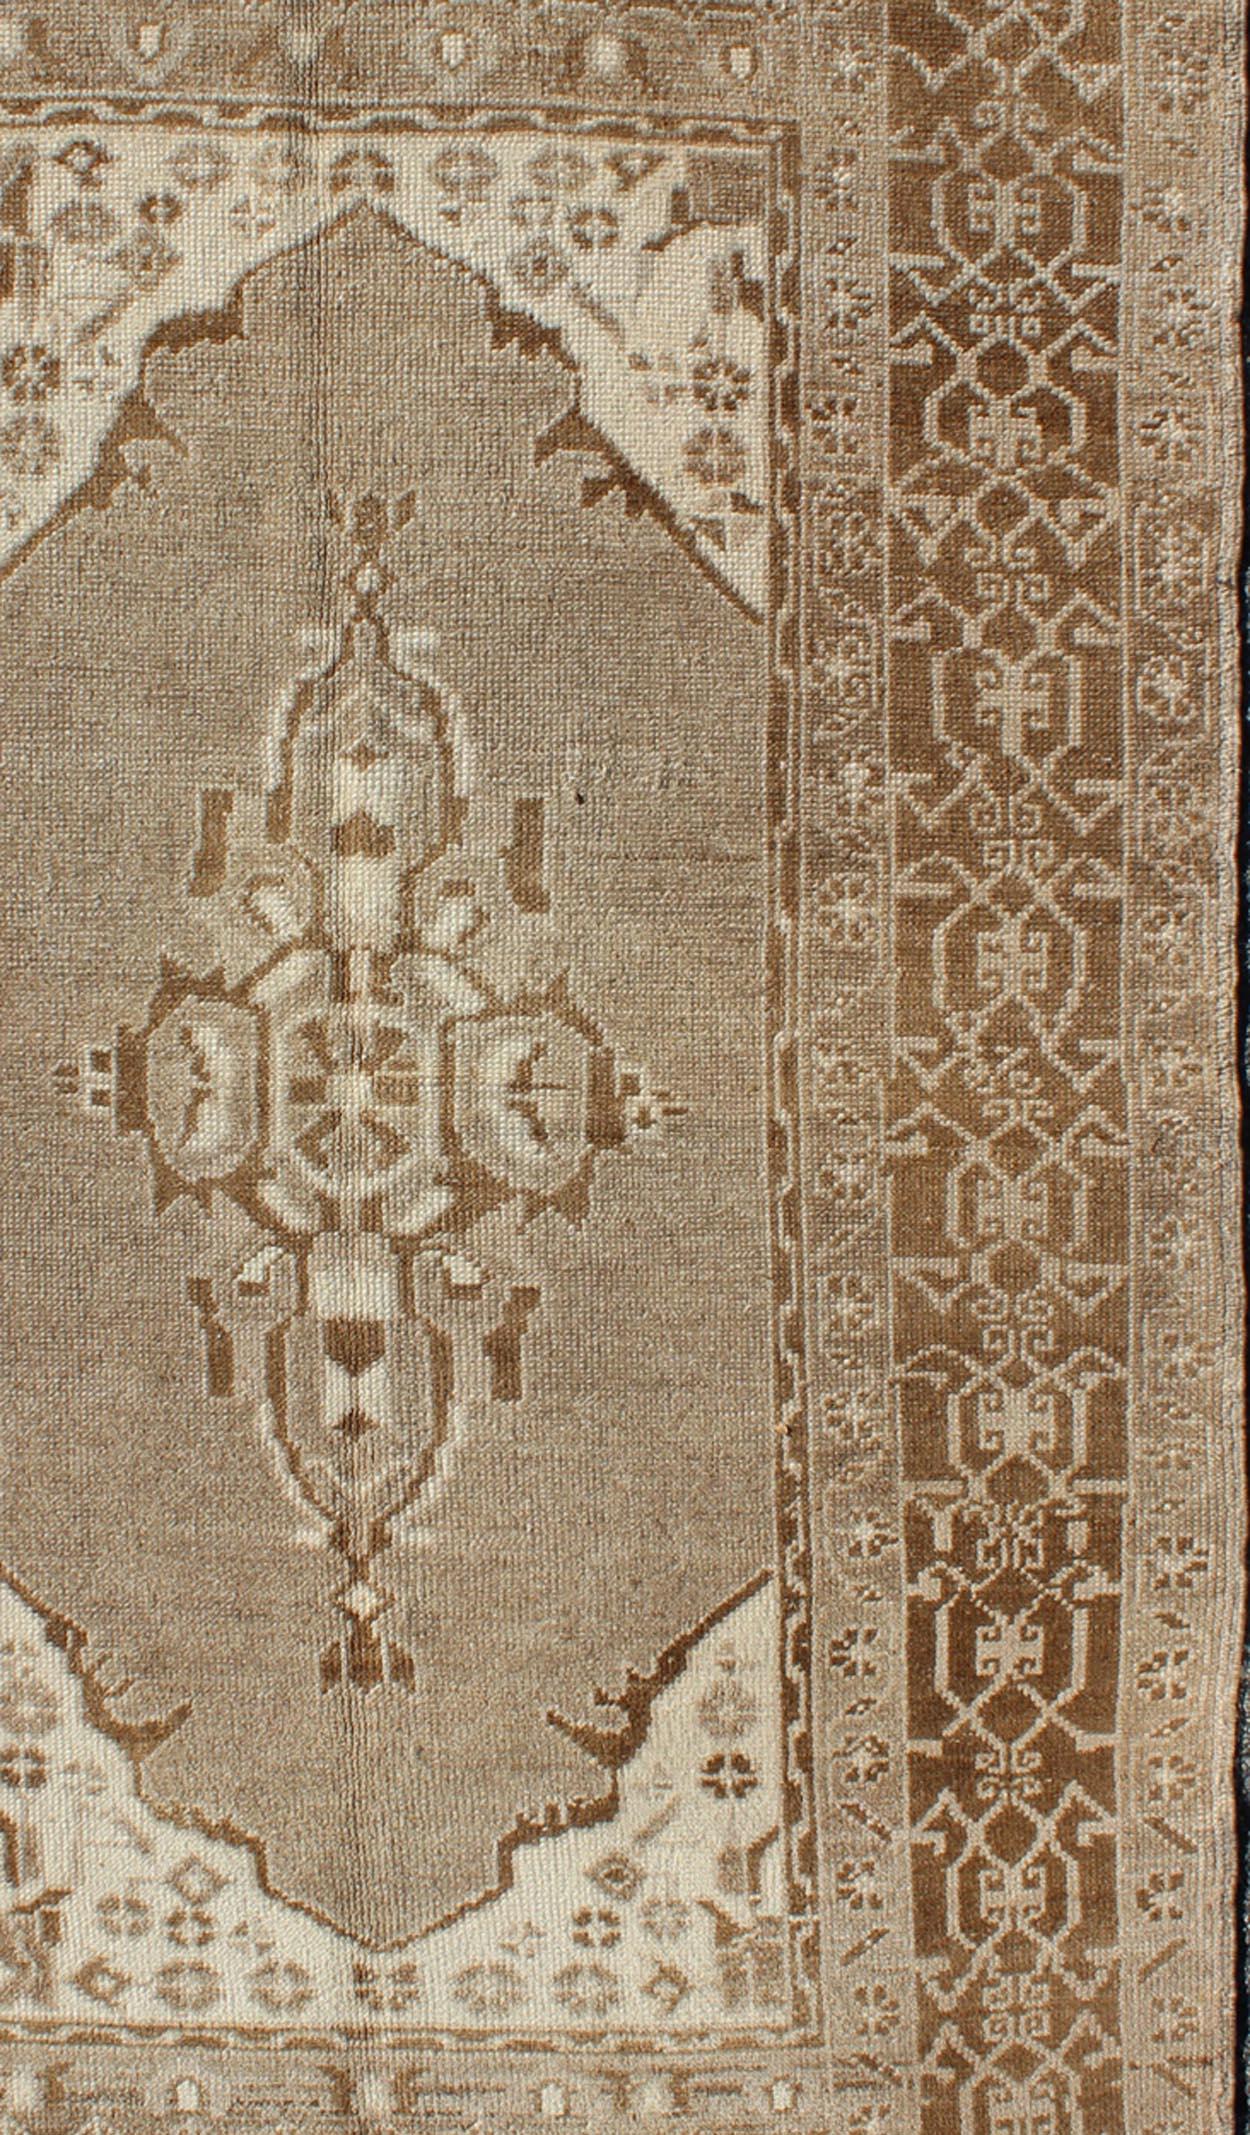 Set amidst a taupe and gray background and featuring a gentle medallion, the beautiful and delicate design of this rug is framed by repeating geometric elements in brown tones. Its masculine border imbues the rug with a unique and rare design